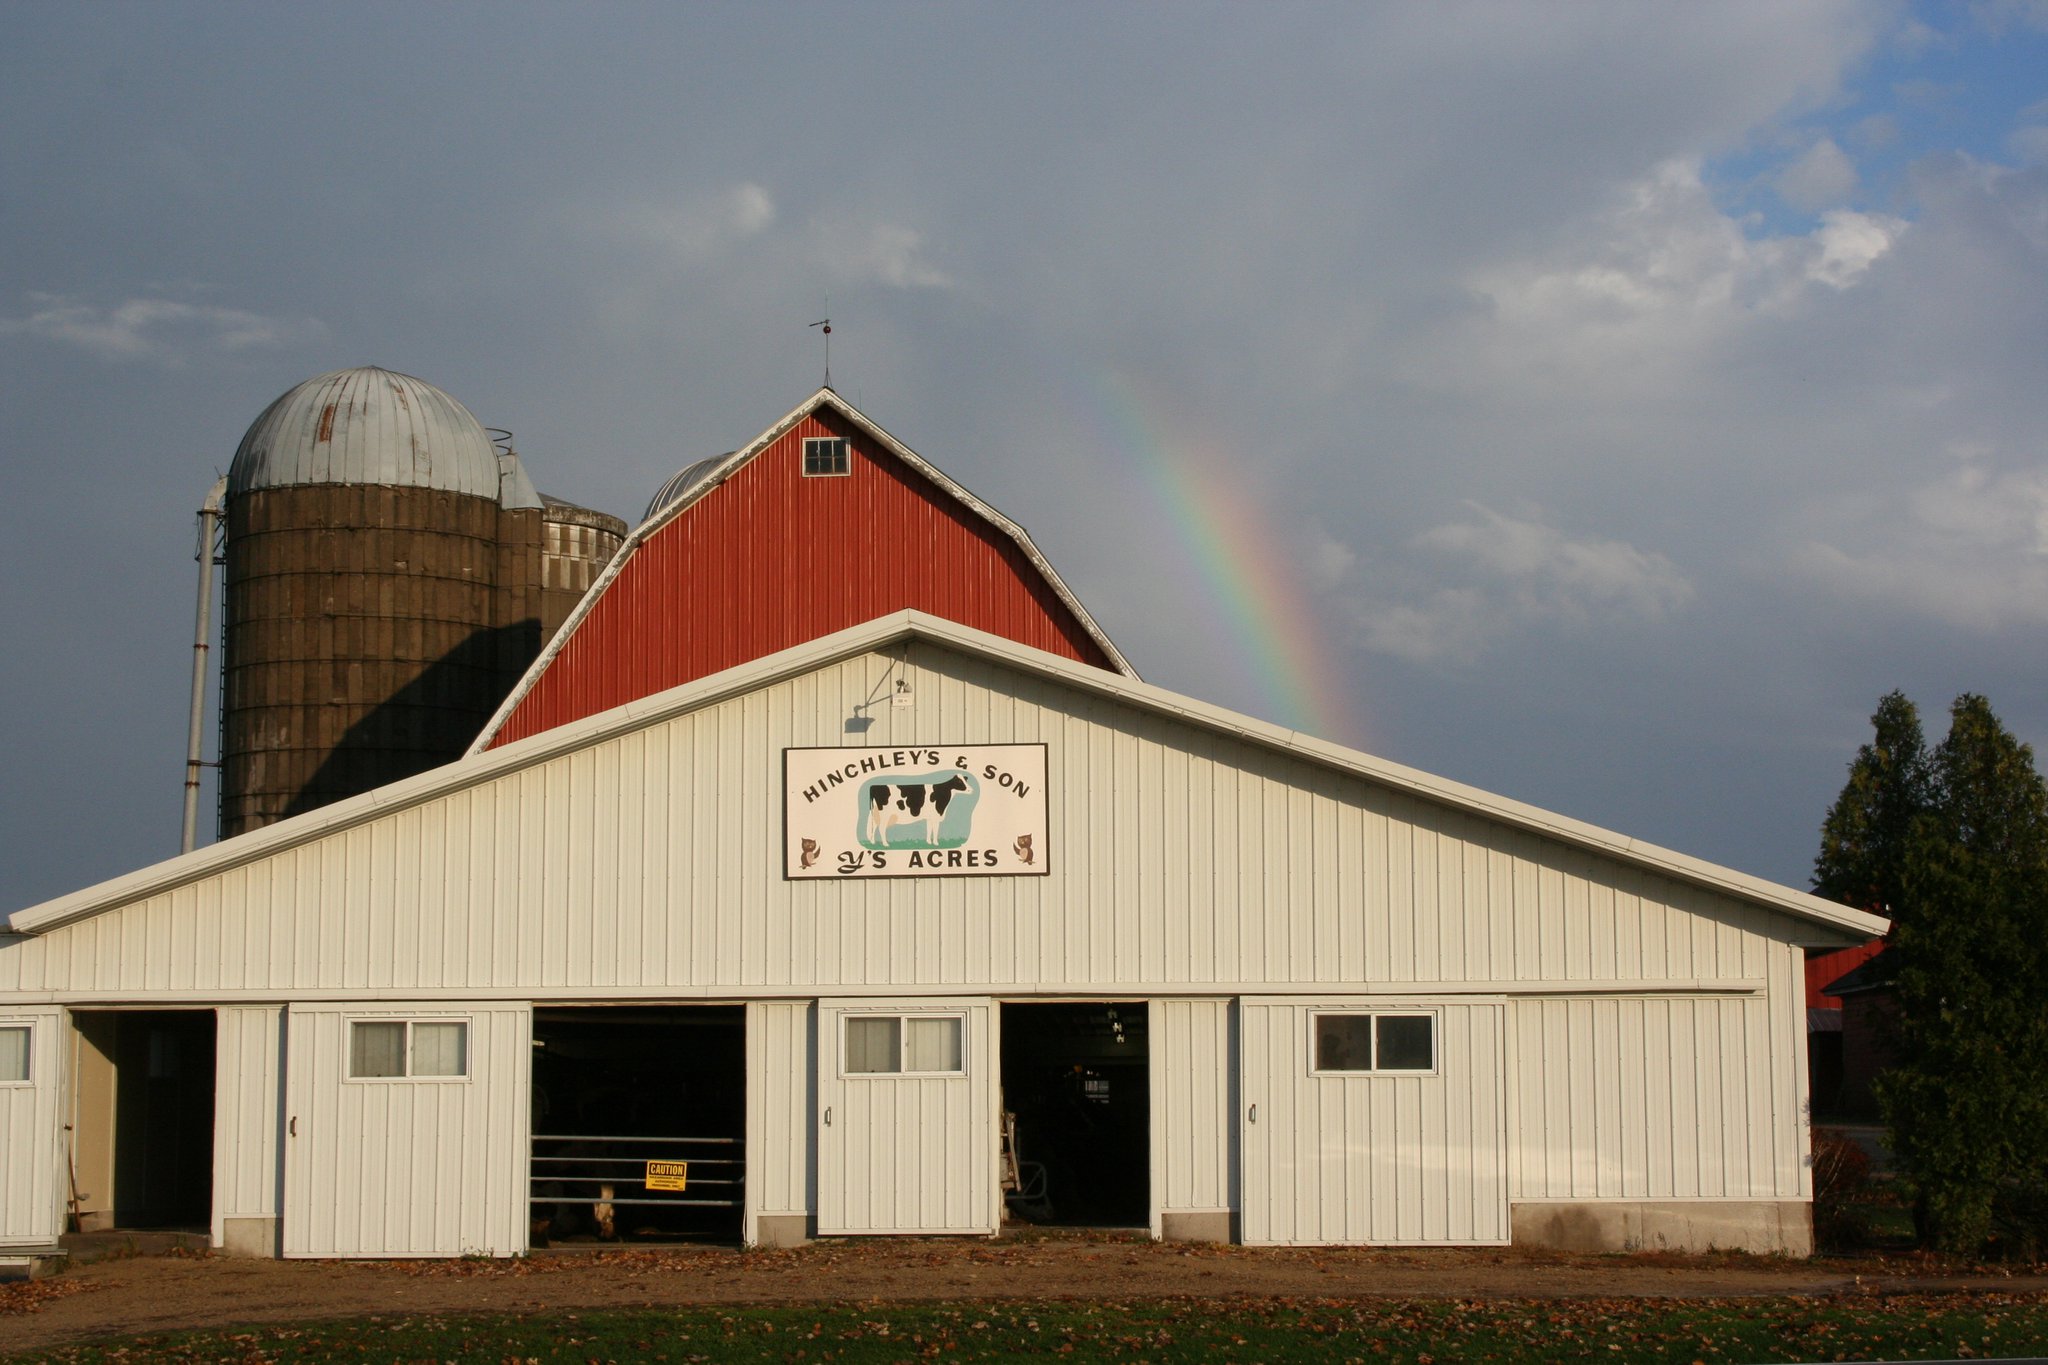 Hinchley's Dairy Farm Tours